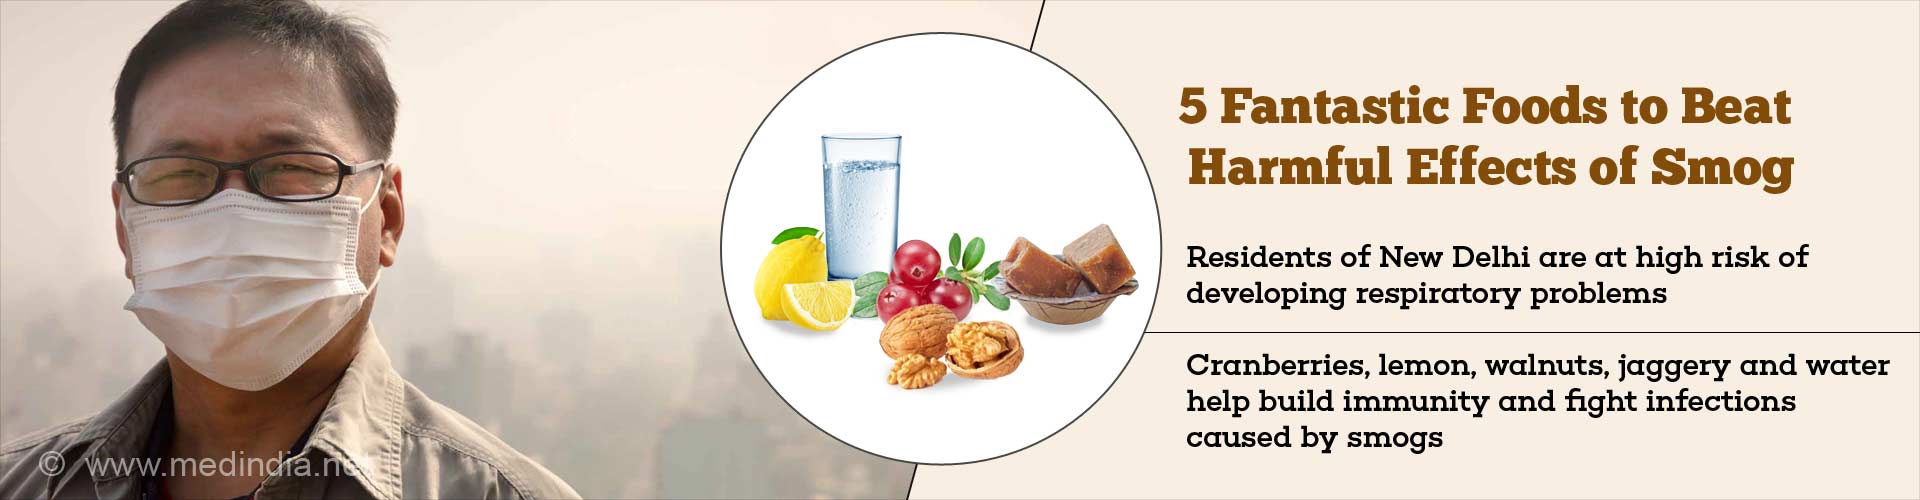 5 fantastic foods to beat harmful effects of smog
- residents of new delhi are at high risk of developing respiratory problems
- cranberries, lemon, walnuts, jaggery and water help build immunity and fight infections caused by smogs